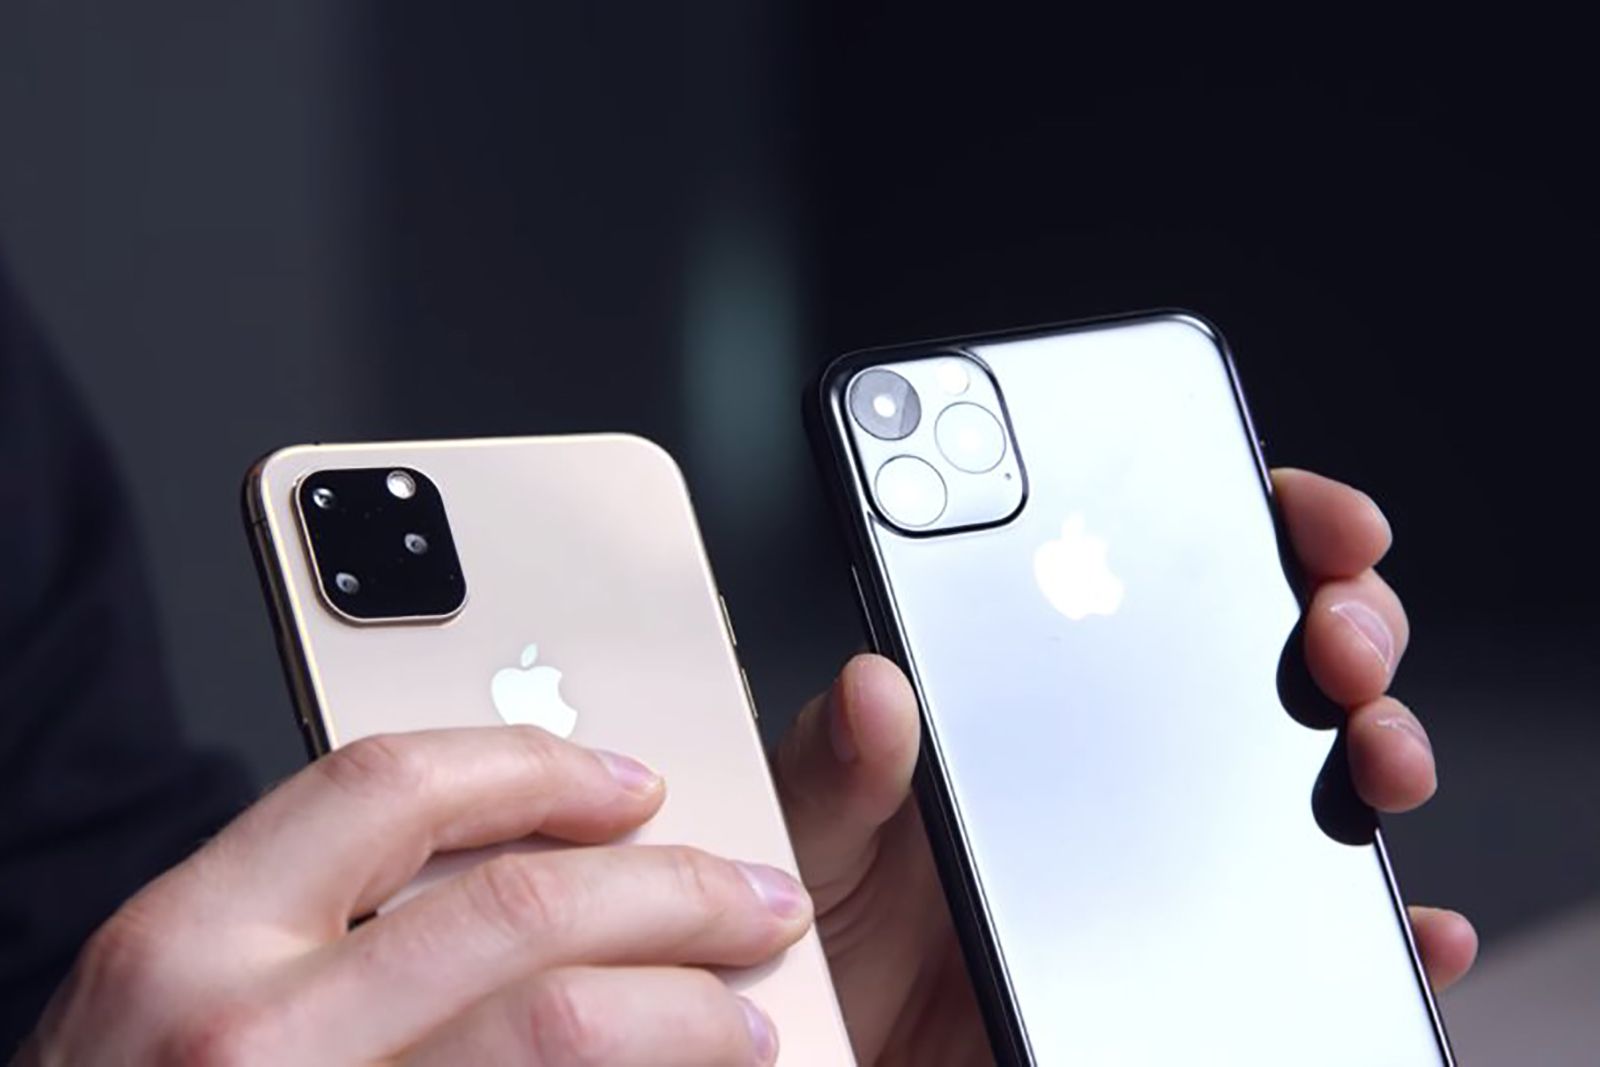 YouTubers are already showing off dummy models of the iPhone 11 image 1